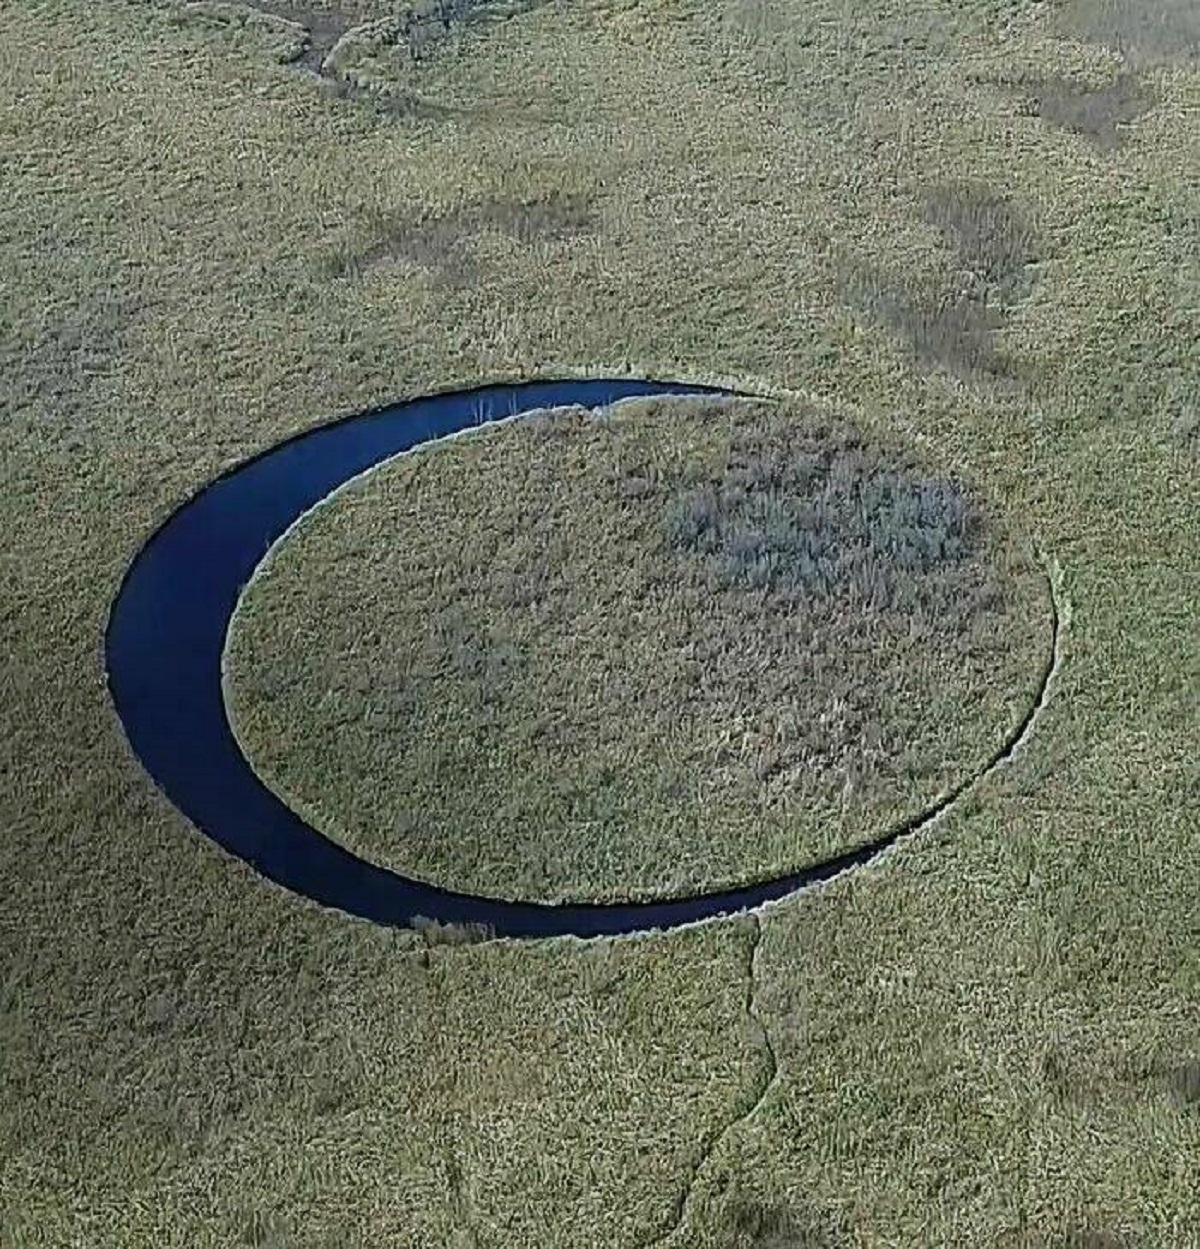 "This Mysterious Circular Island In Argentina Not Only Floats, But Also Rotates Constantly - And We Don’t Really Know Why"